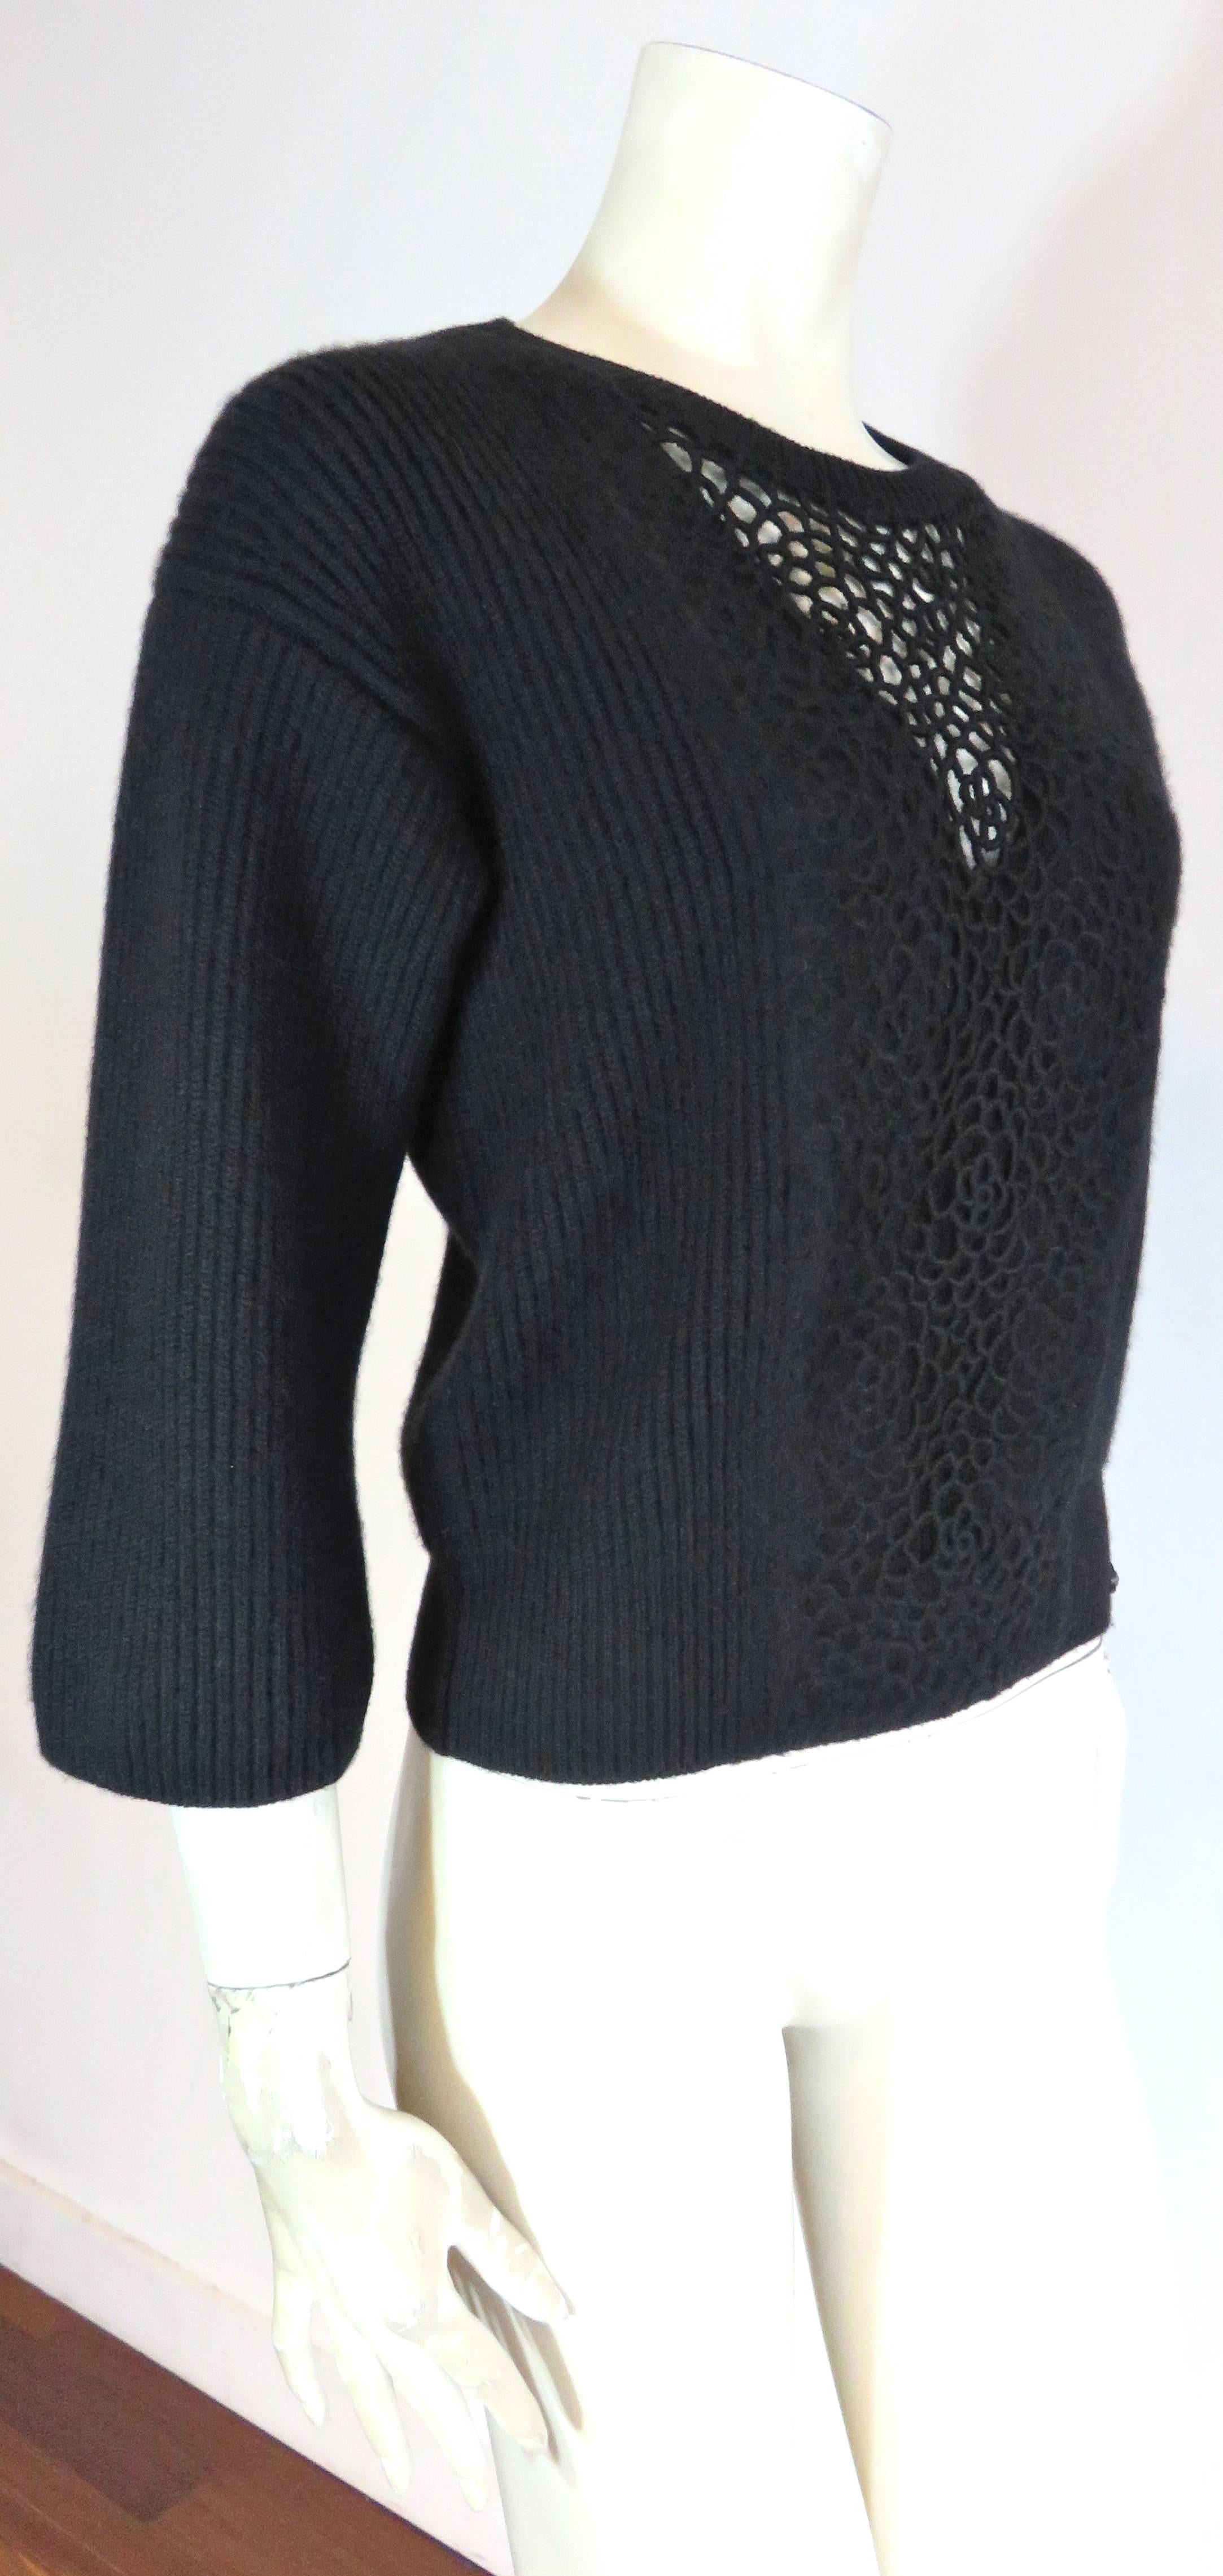 Worn once, excellent condition, CHANEL PARIS, embroidered Camellia cashmere sweater.

Luxurious, black sweater featuring embroidered Camellia lace work at front, with illusion detail at front 'V' neck.

Thick, rib-knit, 100% cashmere